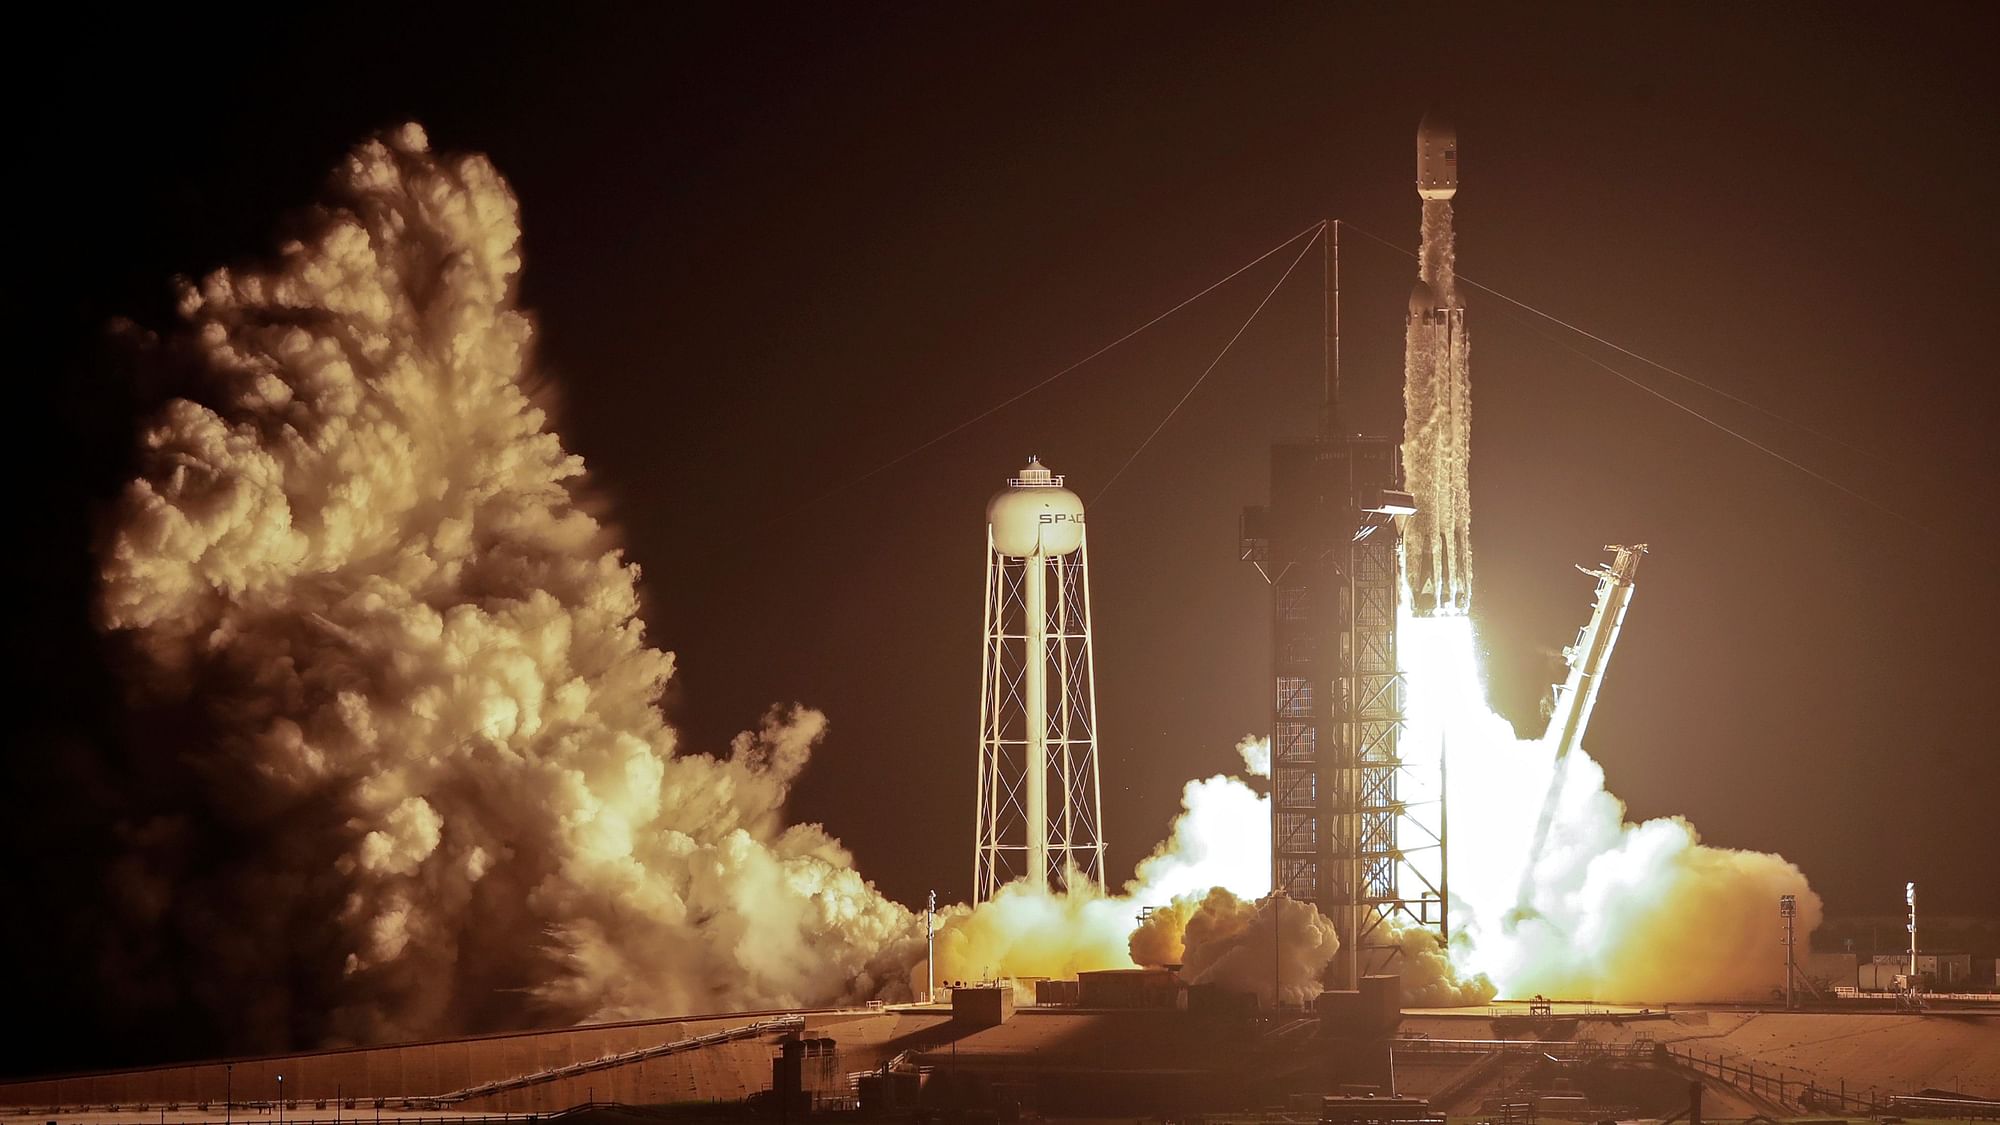  It was the third flight of SpaceX’s Falcon Heavy rocket, but the first ordered by the military.